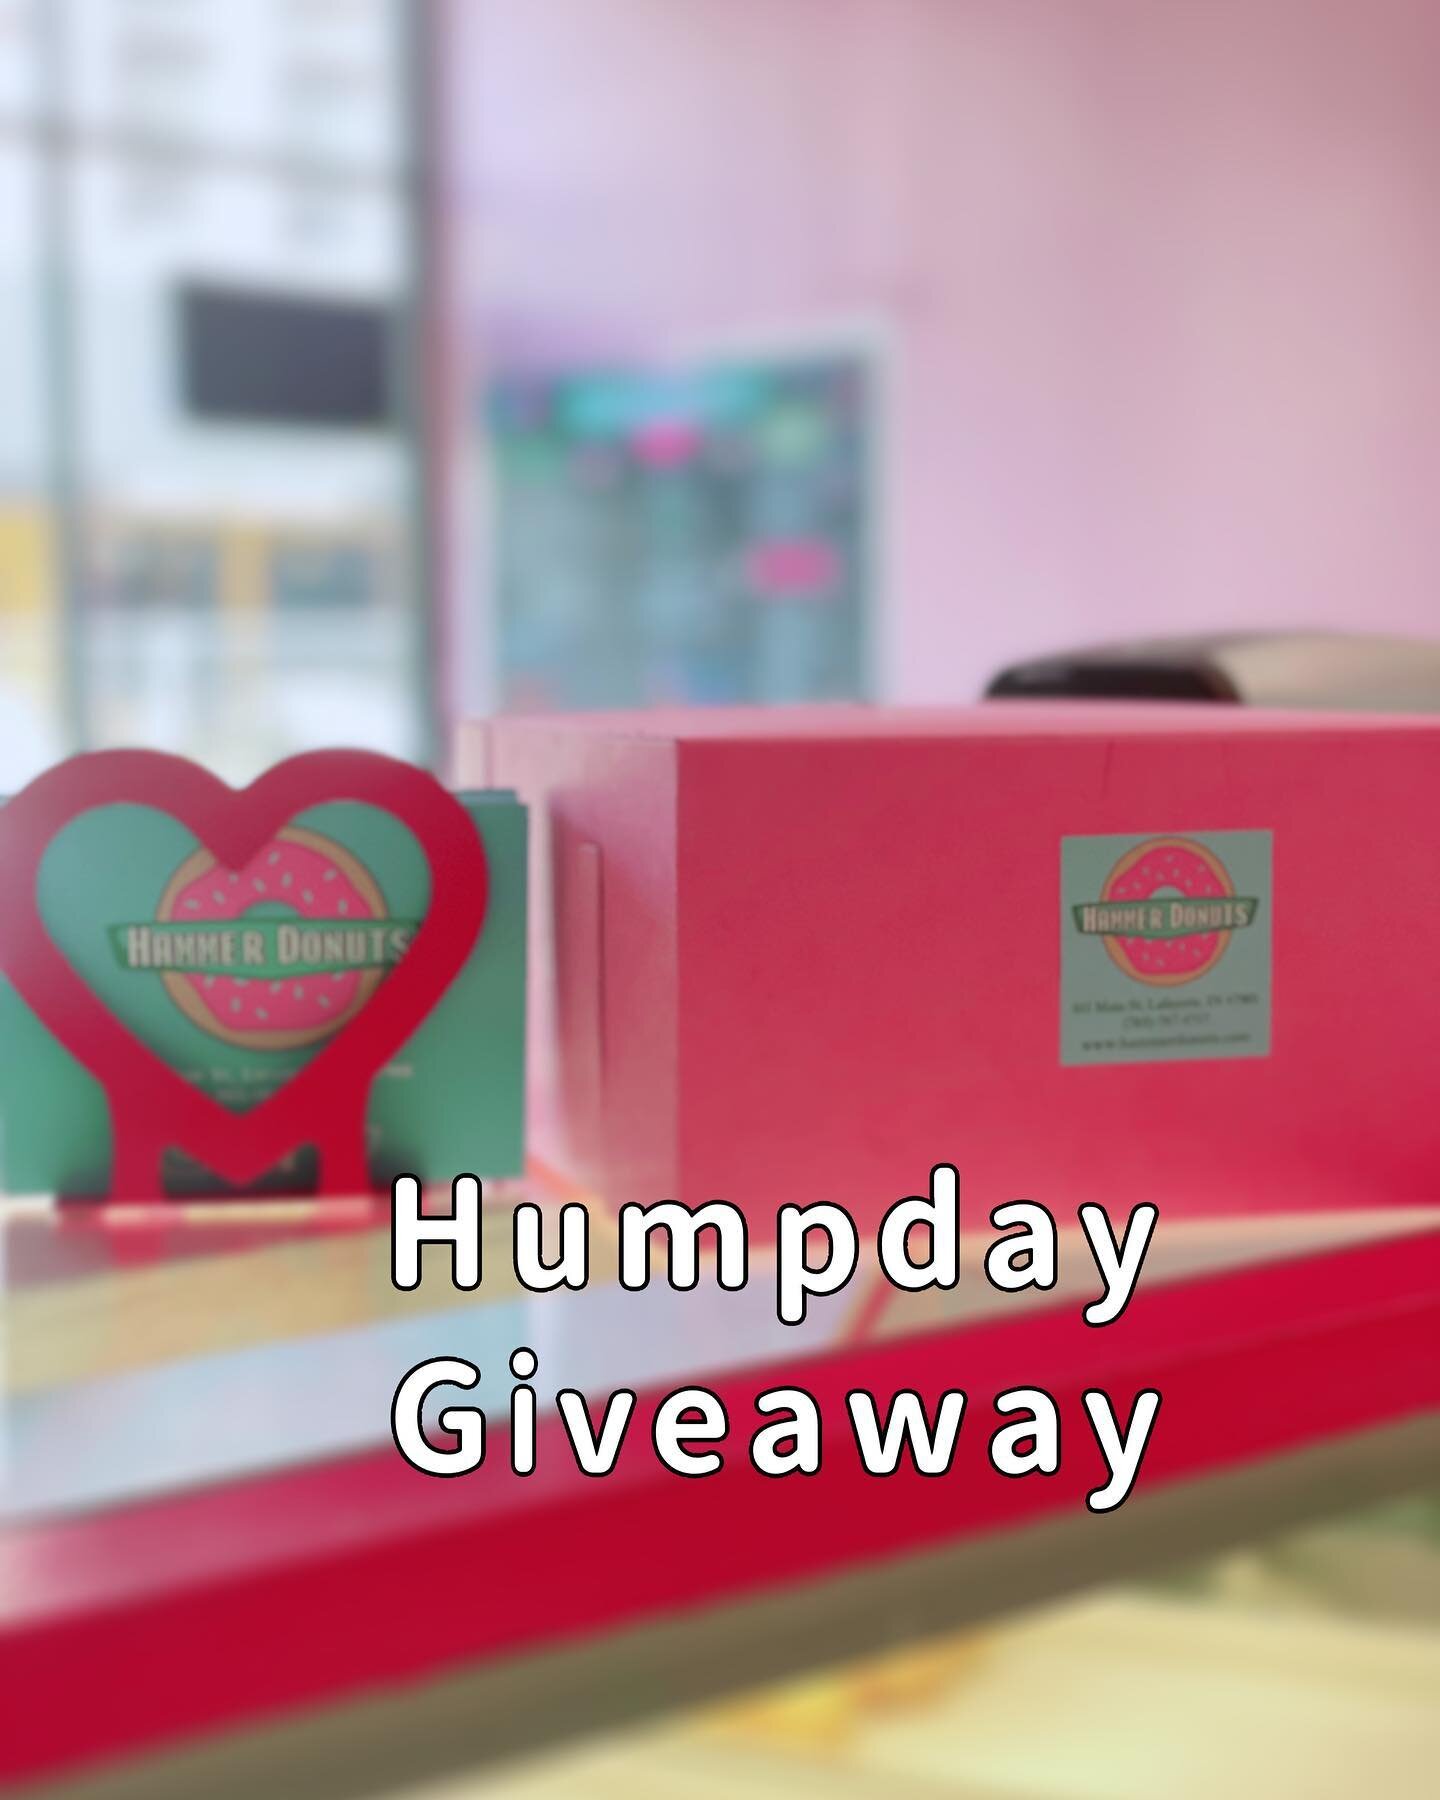 Happy Humpday Giveaway🥳
Like this photo, tag three friends, and follow us for a chance to win a dozen donuts! 🍩
This giveaway ends same day at 1:30 PM. The winner will be announced around 2PM in the comment section. Please make sure you&rsquo;re ab